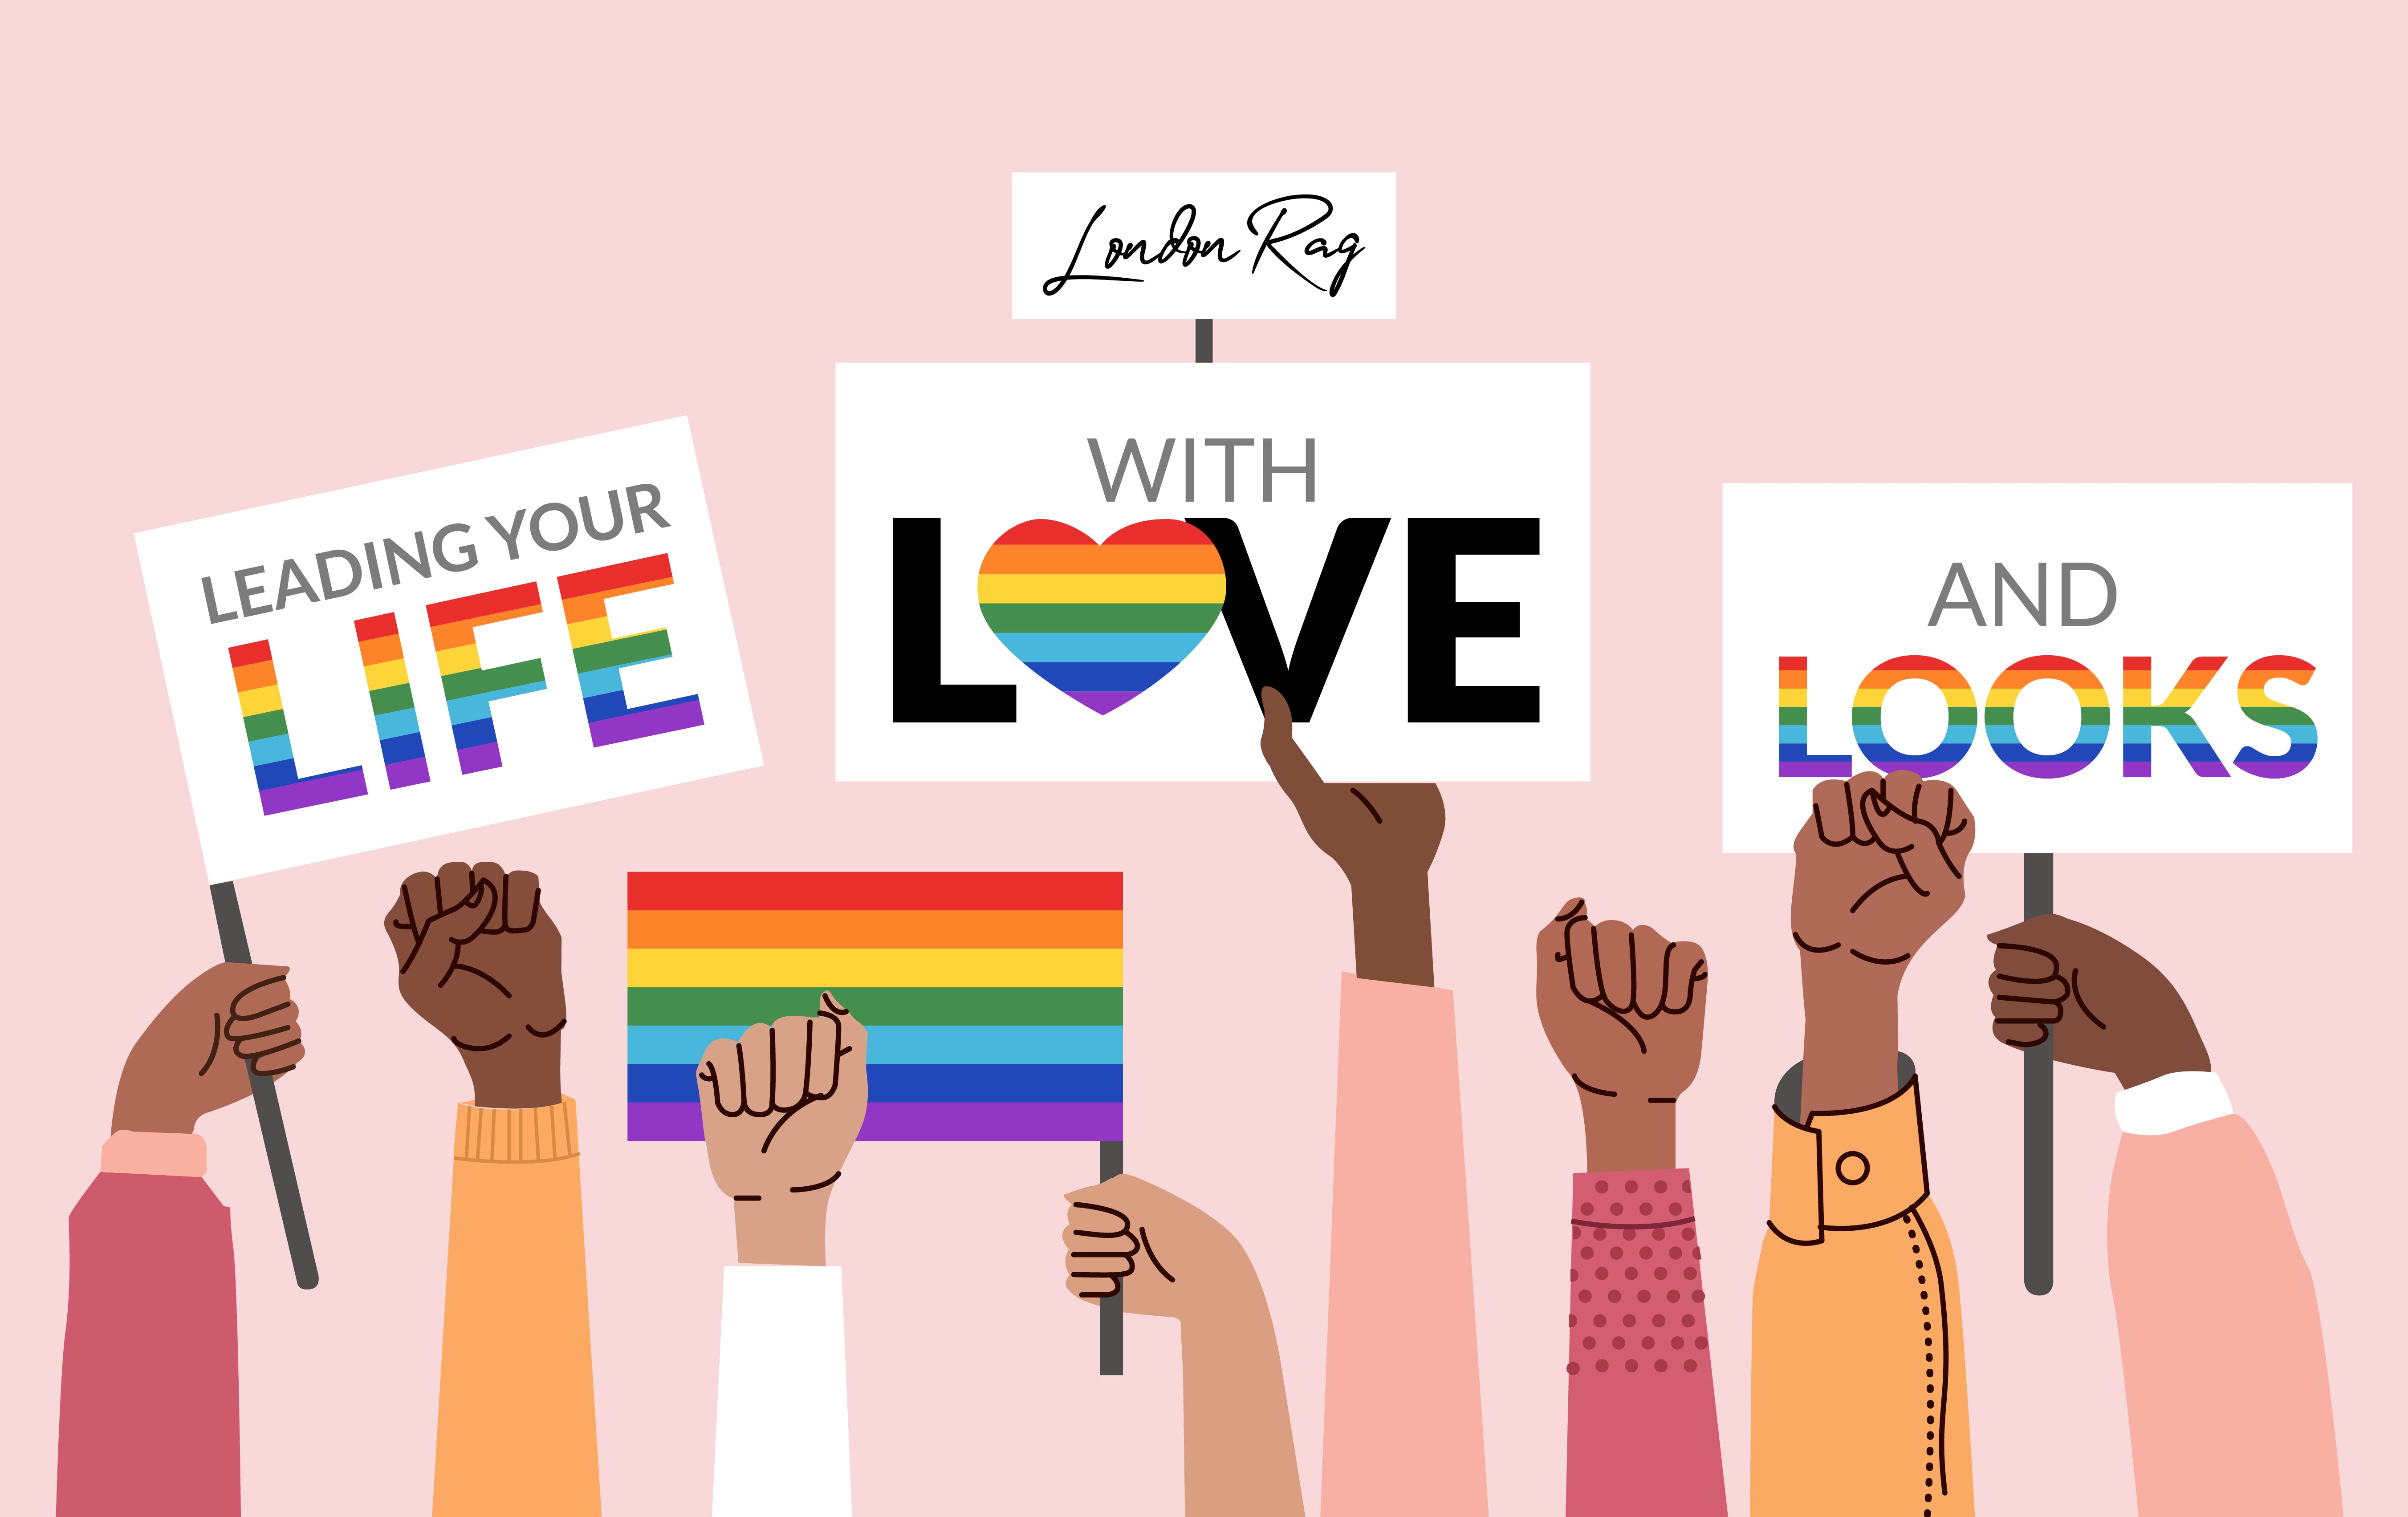 Pride Month: Leading Your Life with Love and Looks